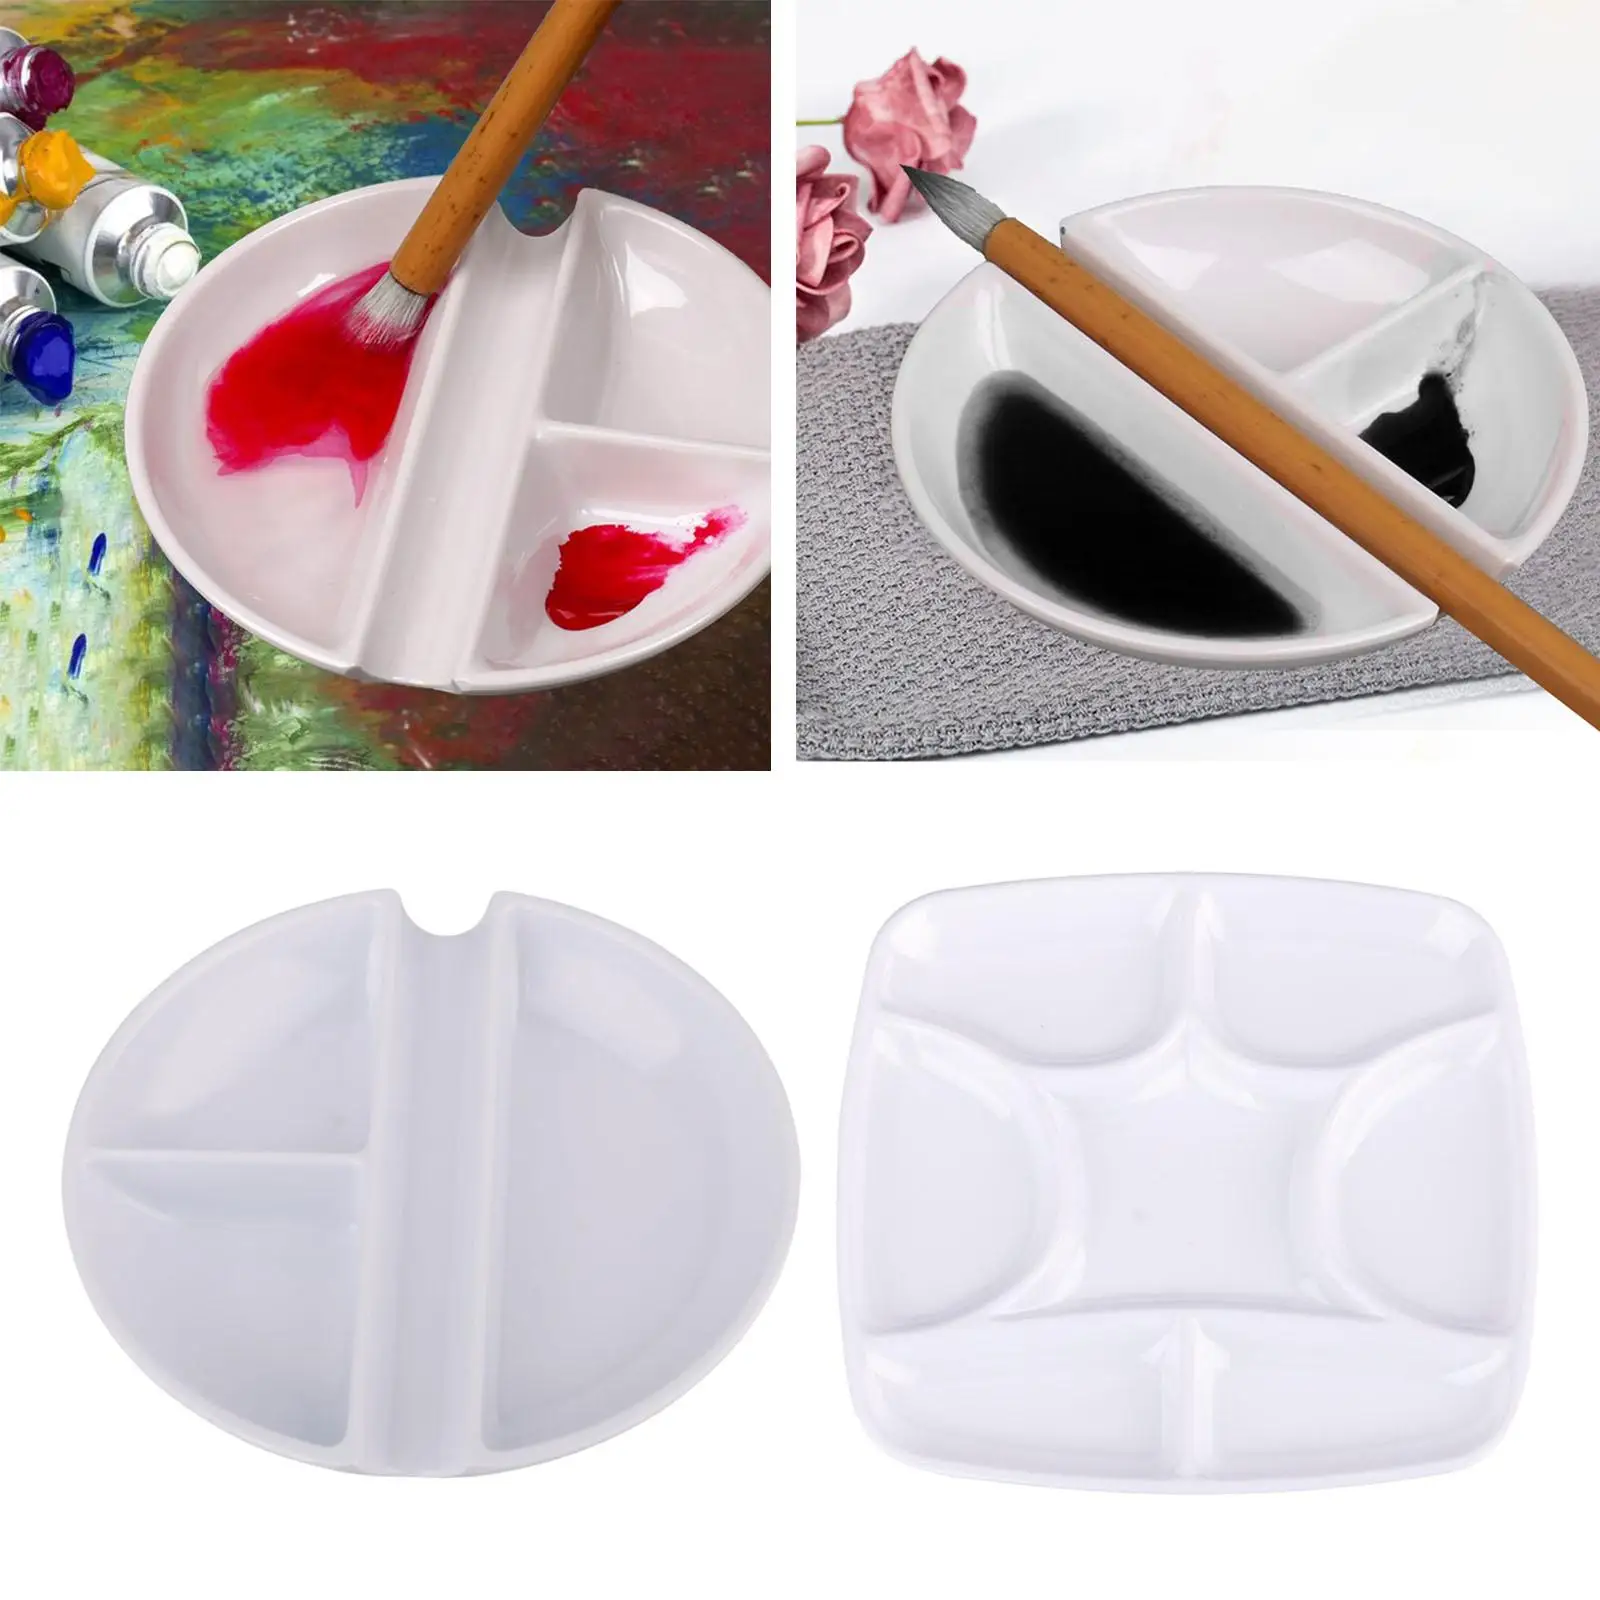 Professional Paint Mixing Tray Coloring Art Supplies Crafts DIY Tool Paint Holder Painting Palette for Pigment Children Project